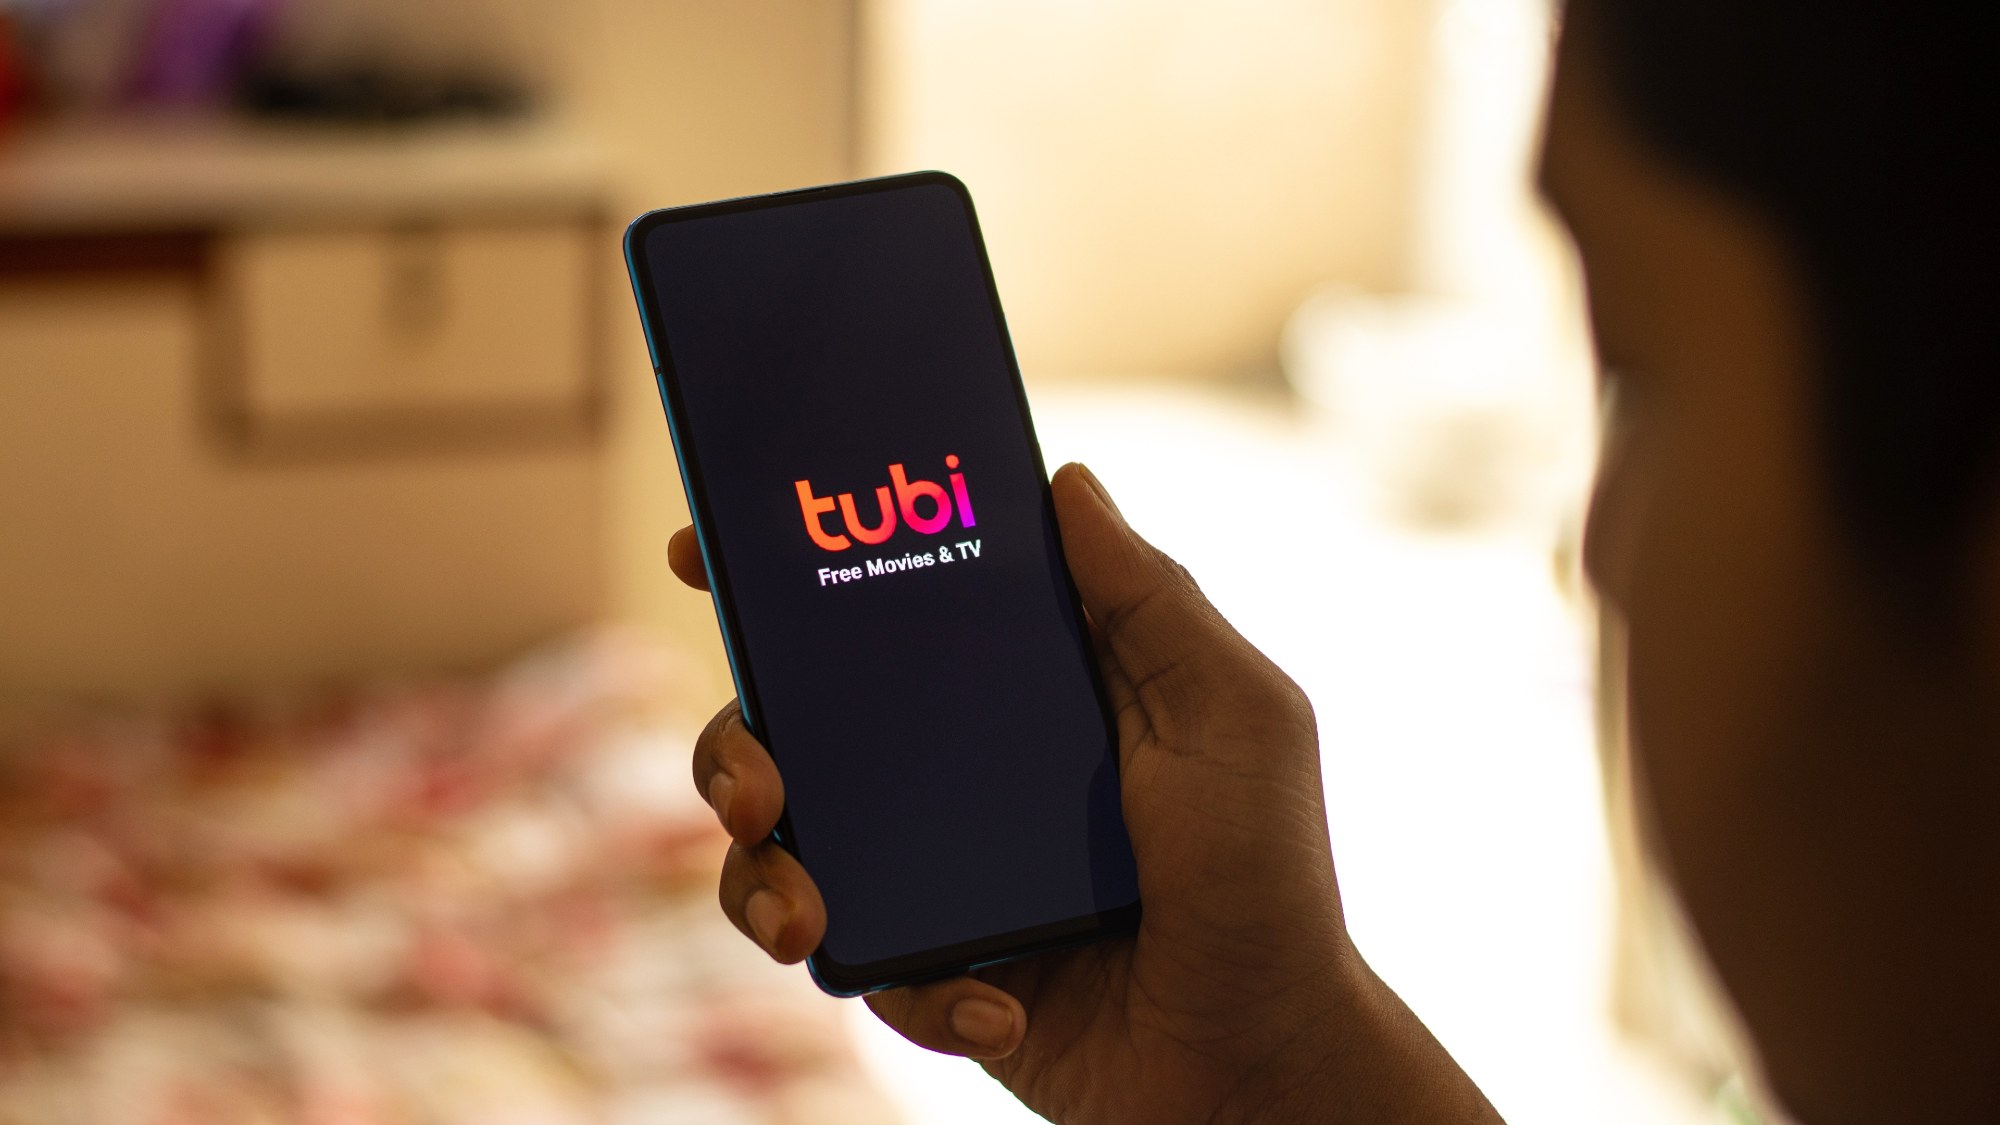 Tubi app on a mobile phone